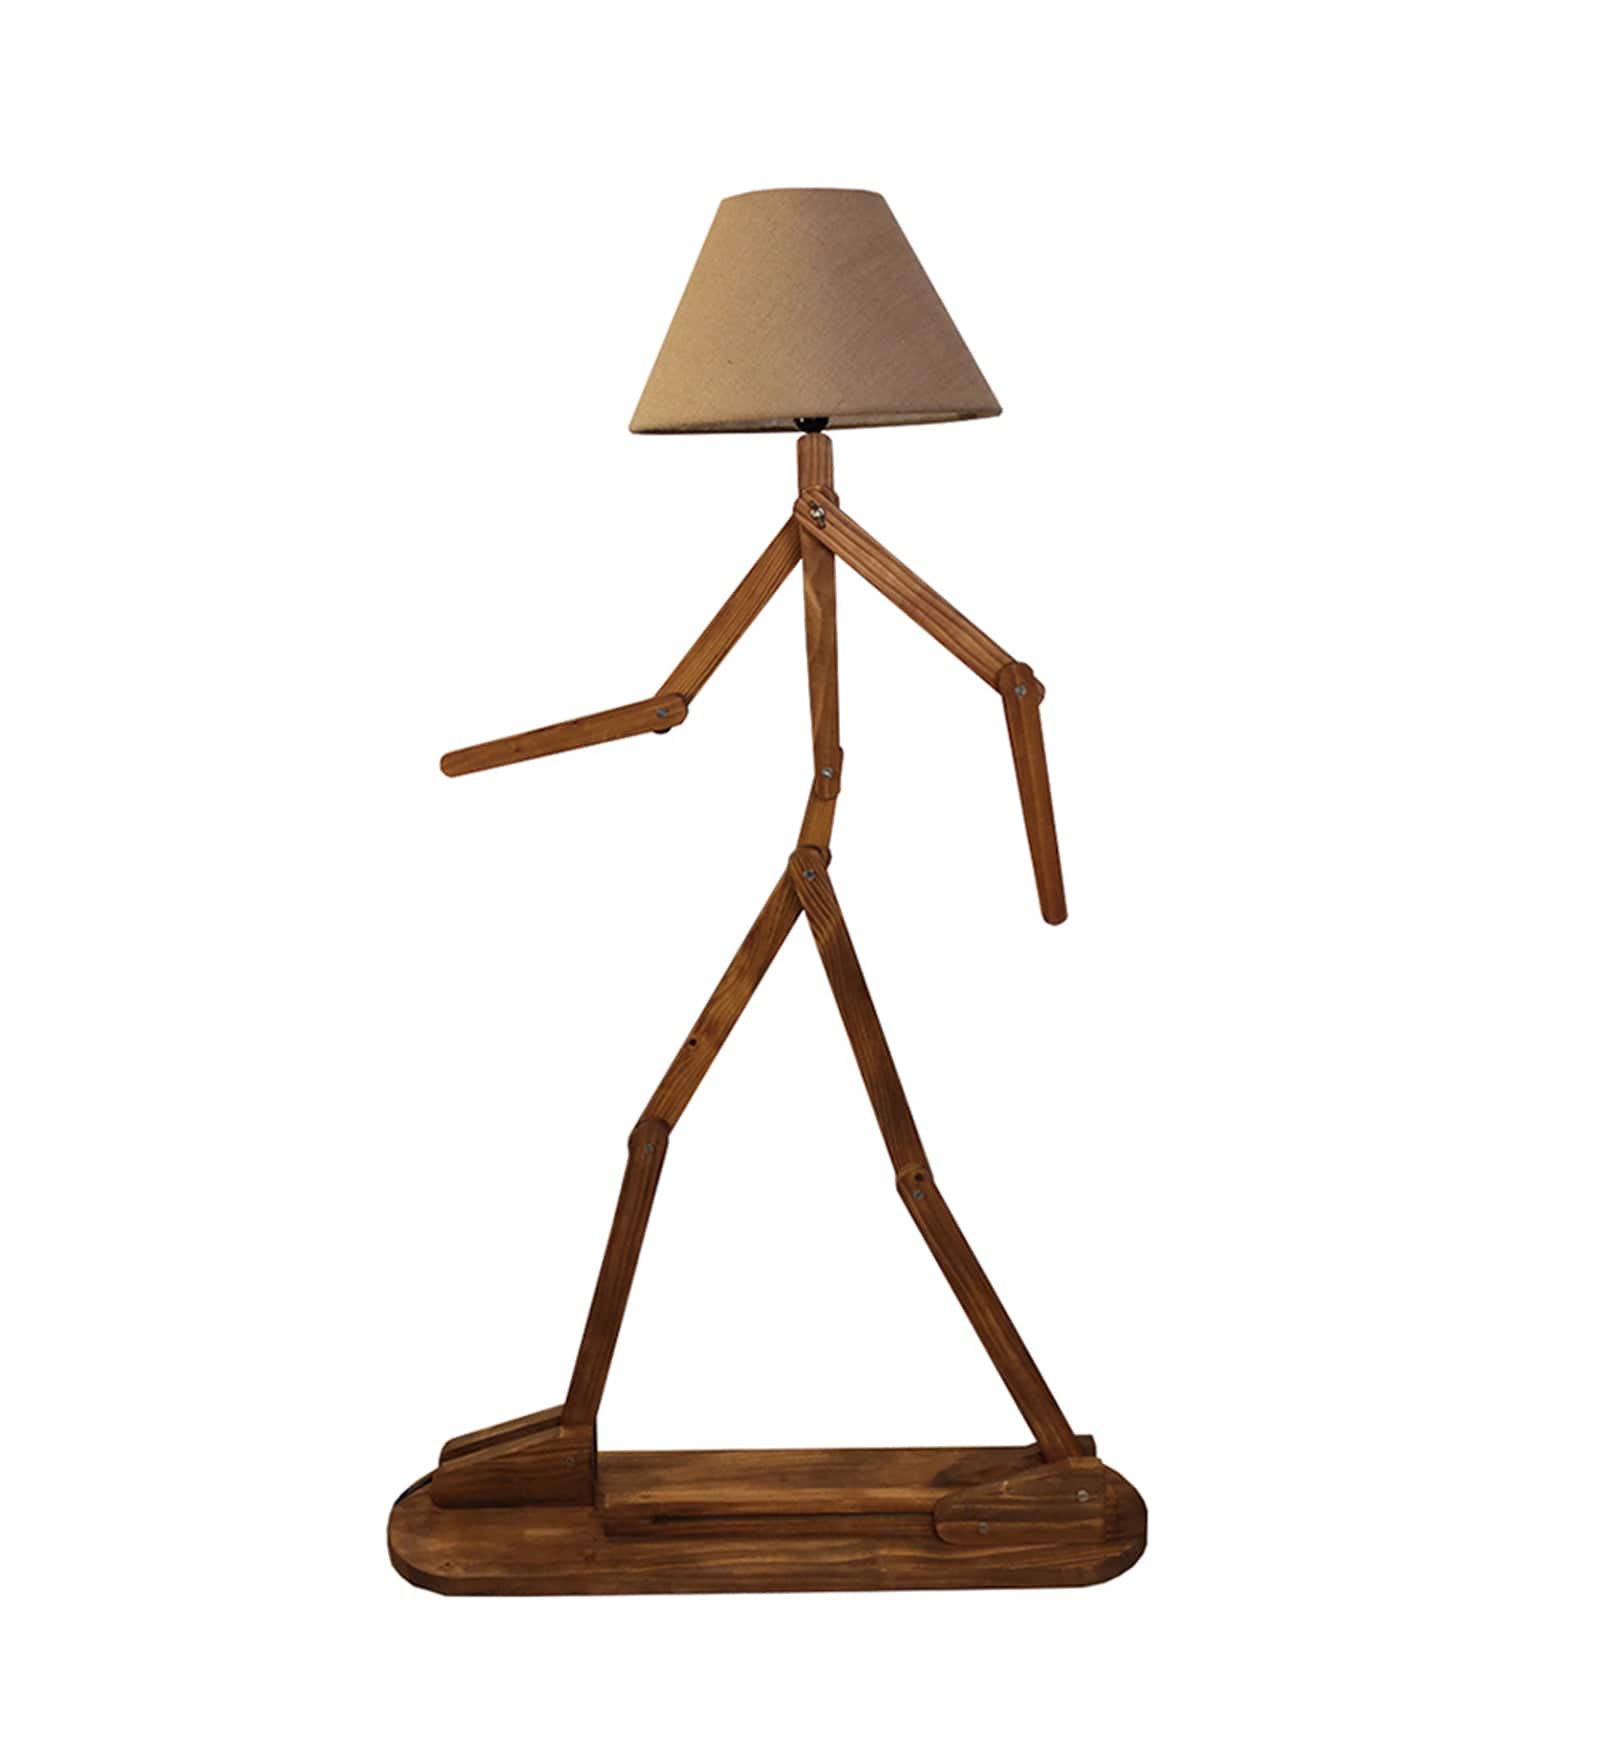 Moonwalker Wooden Floor Lamp with Brown Base and Premium Beige Fabric Lampshade (BULB NOT INCLUDED)